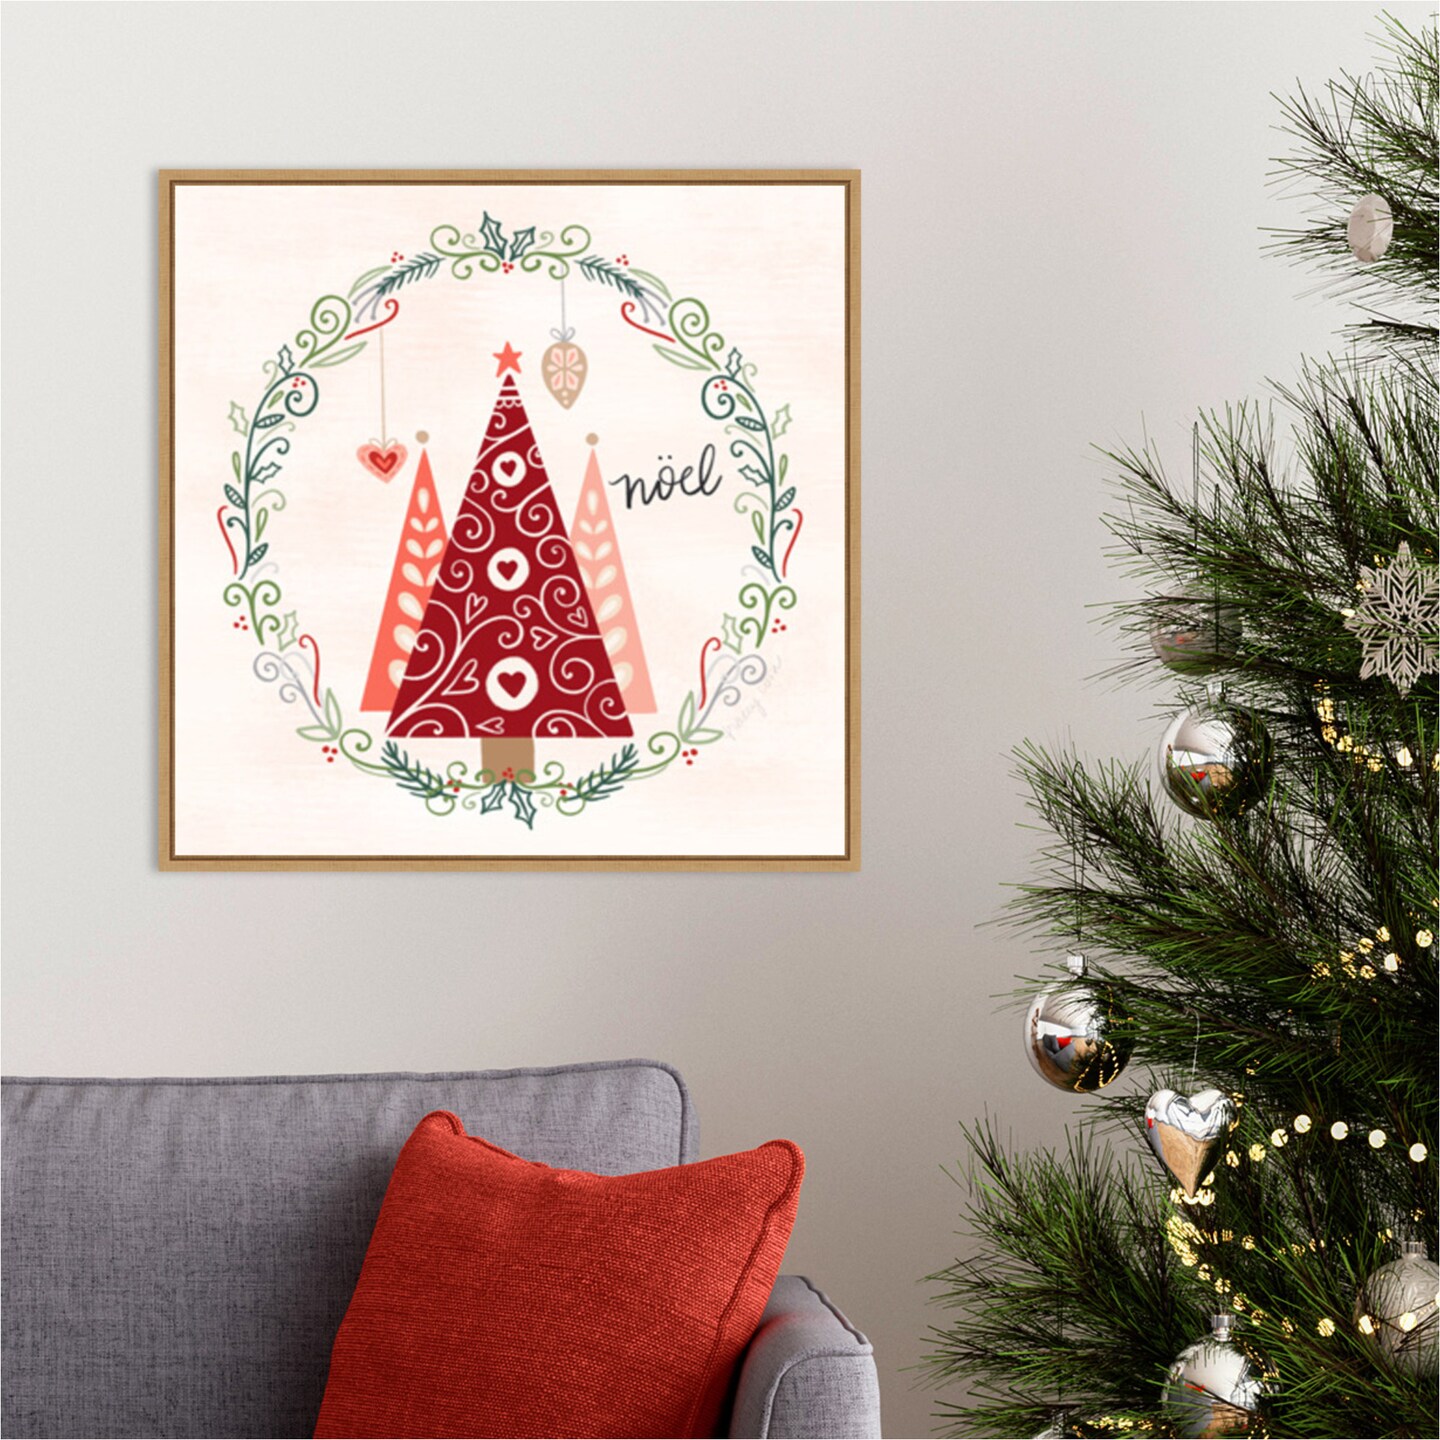 Hygge Christmas III by Noonday Design 22-in. W x 22-in. H. Canvas Wall Art Print Framed in Natural